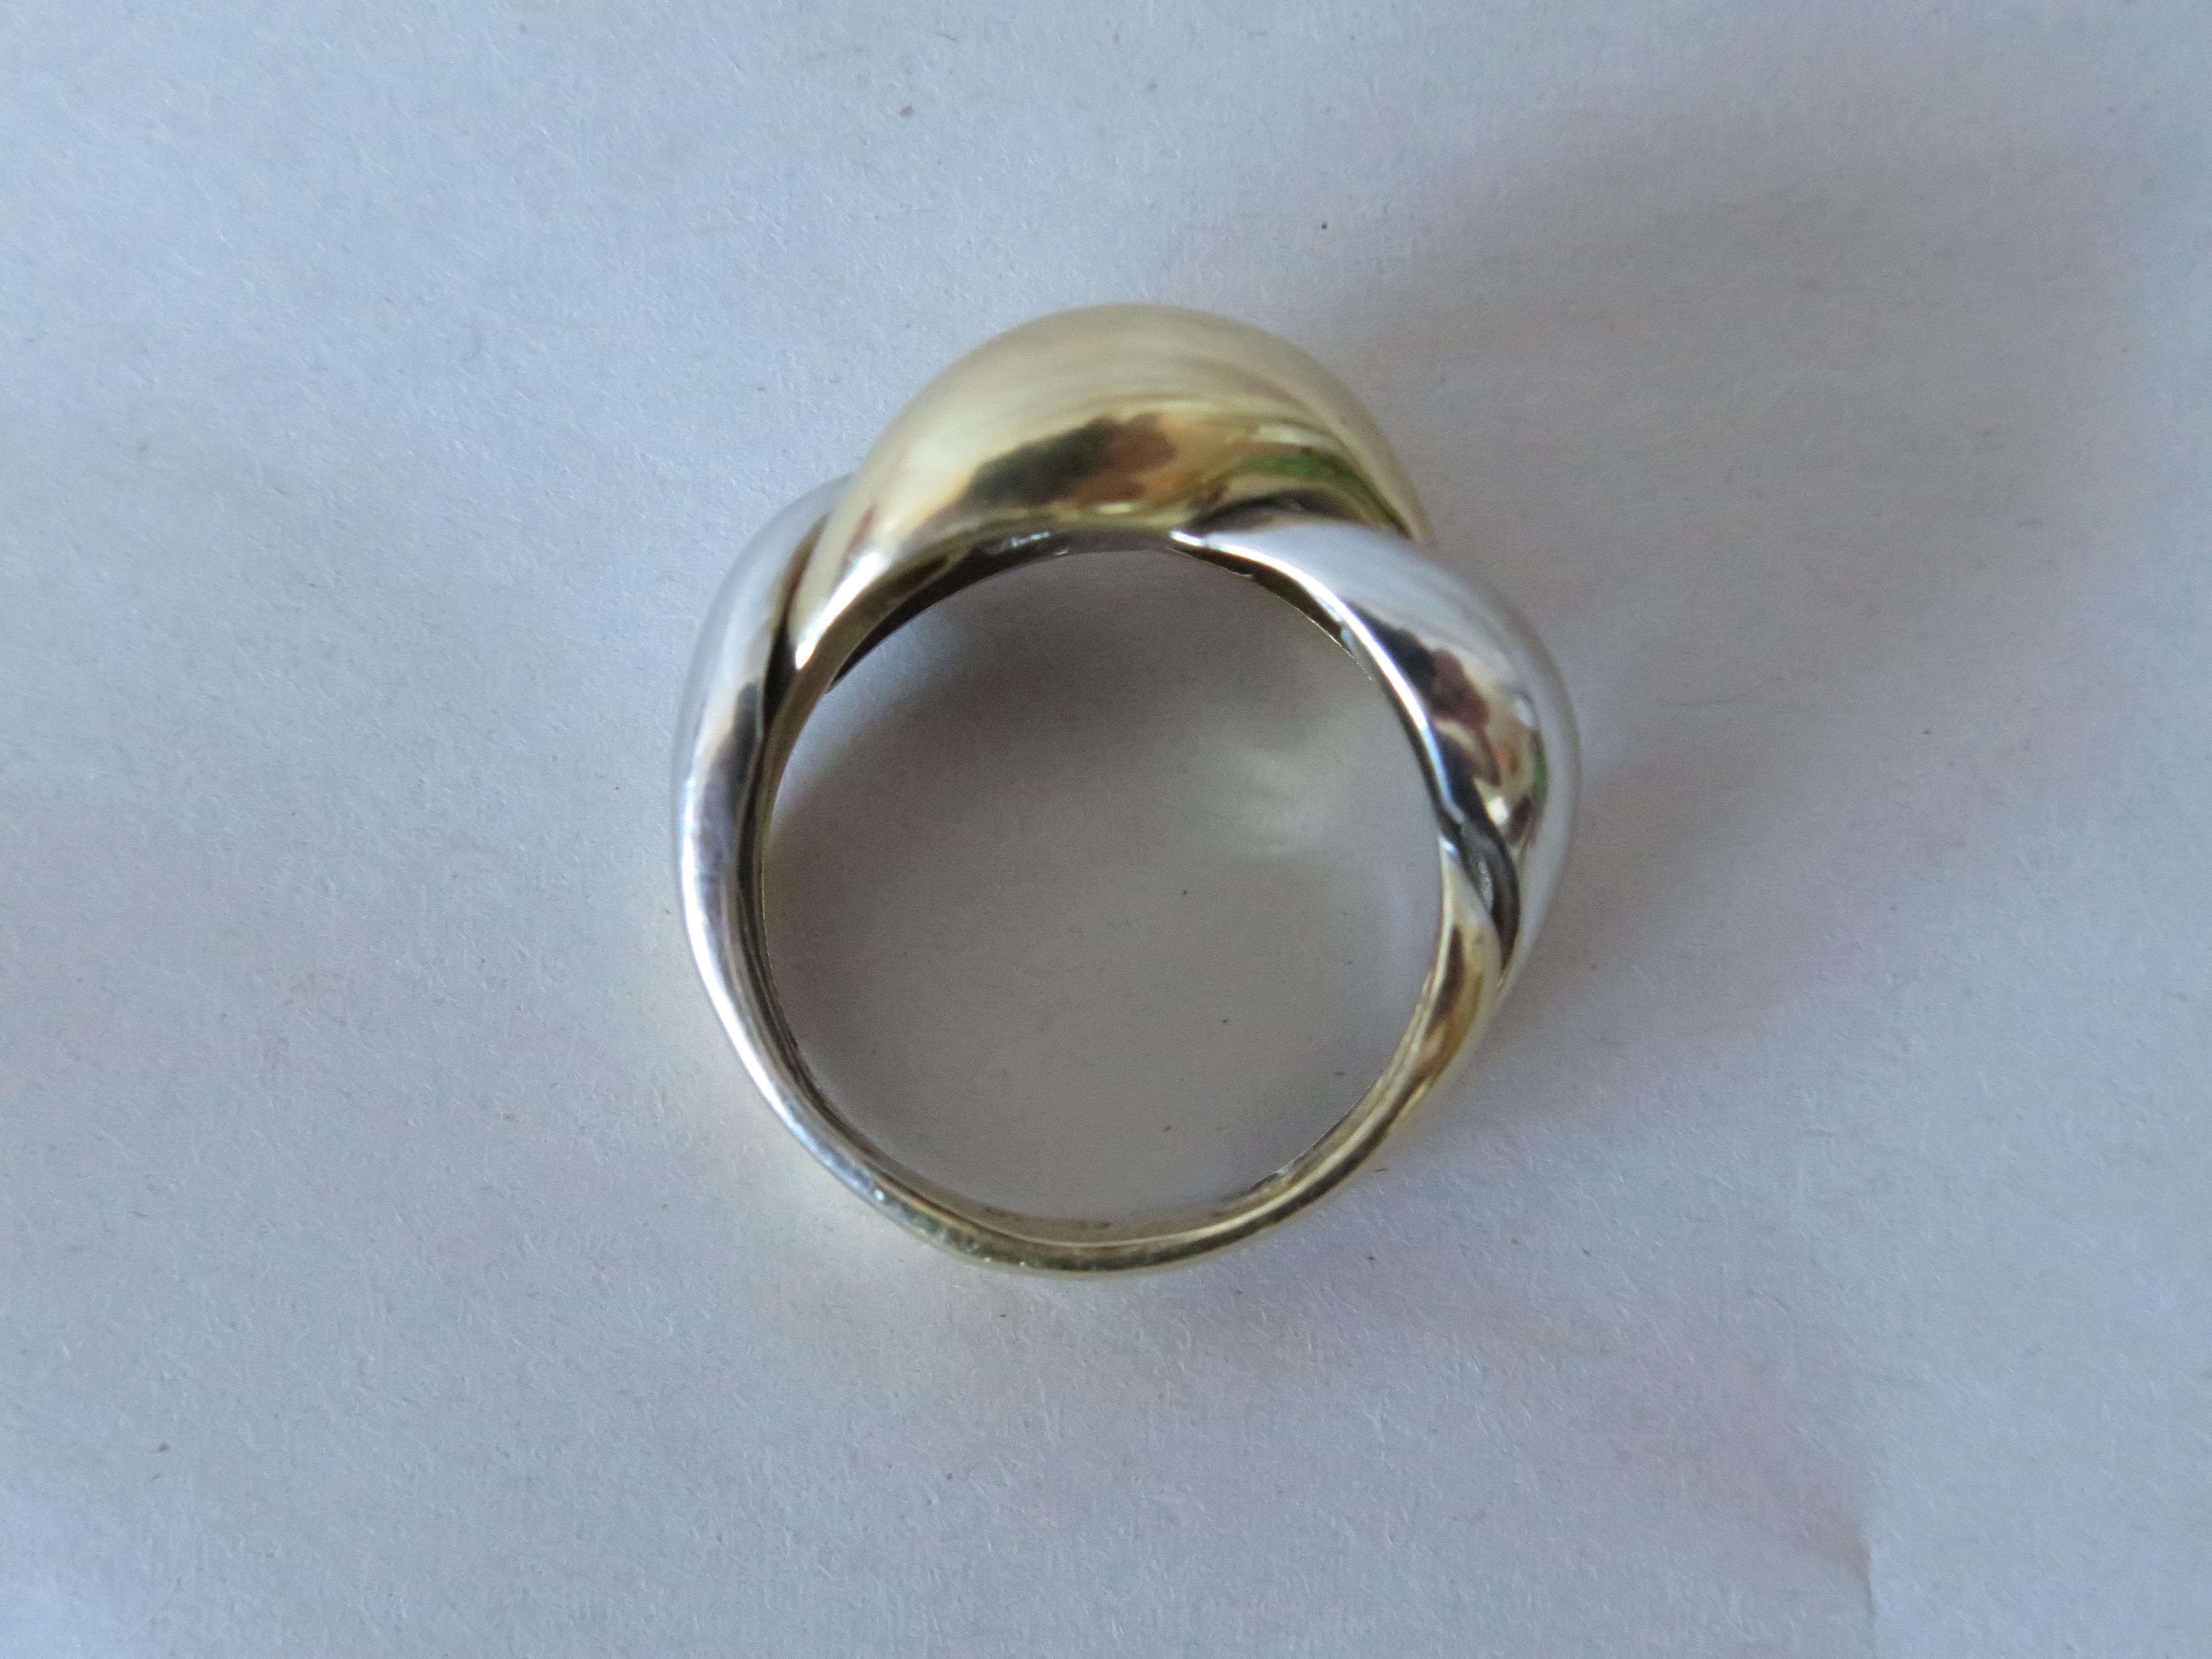 Le Gi Italy Twist Yellow White Gold Ring  14K  In Good Condition For Sale In Saint Petersburg, FL